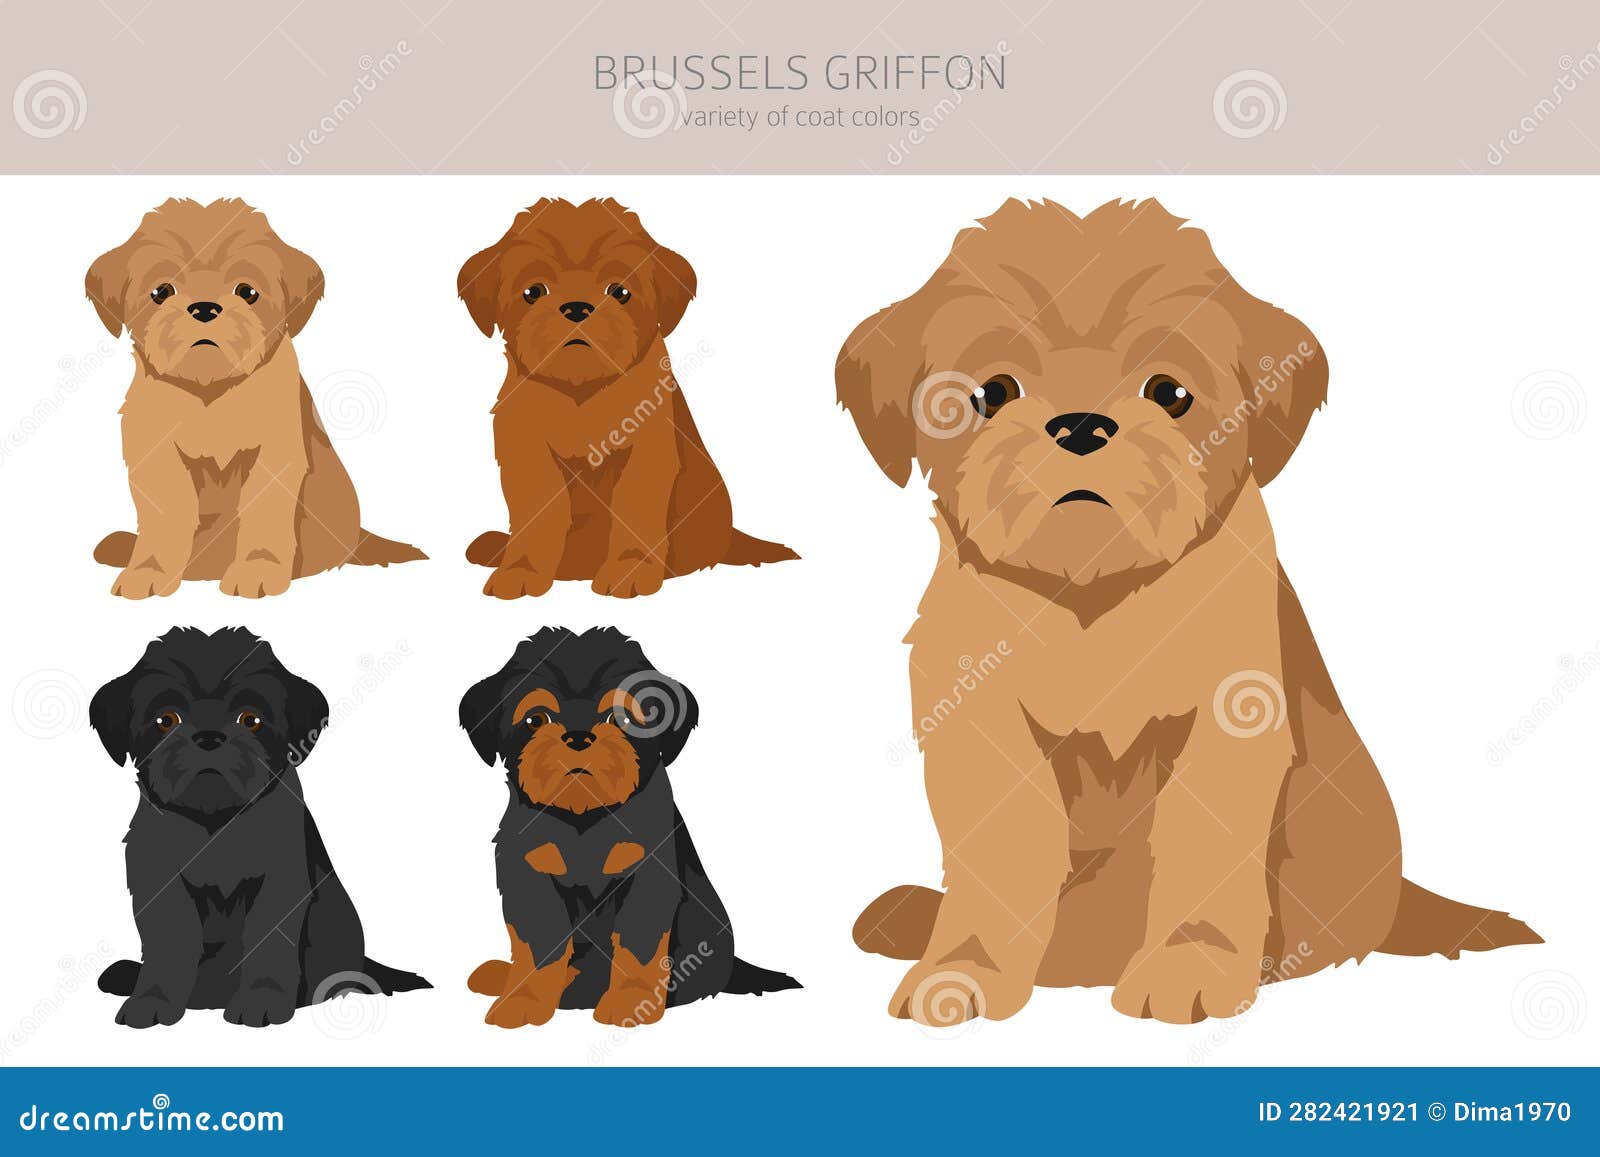 Brussels Griffon Puppies Clipart. Different Coat Colors and Poses Set ...